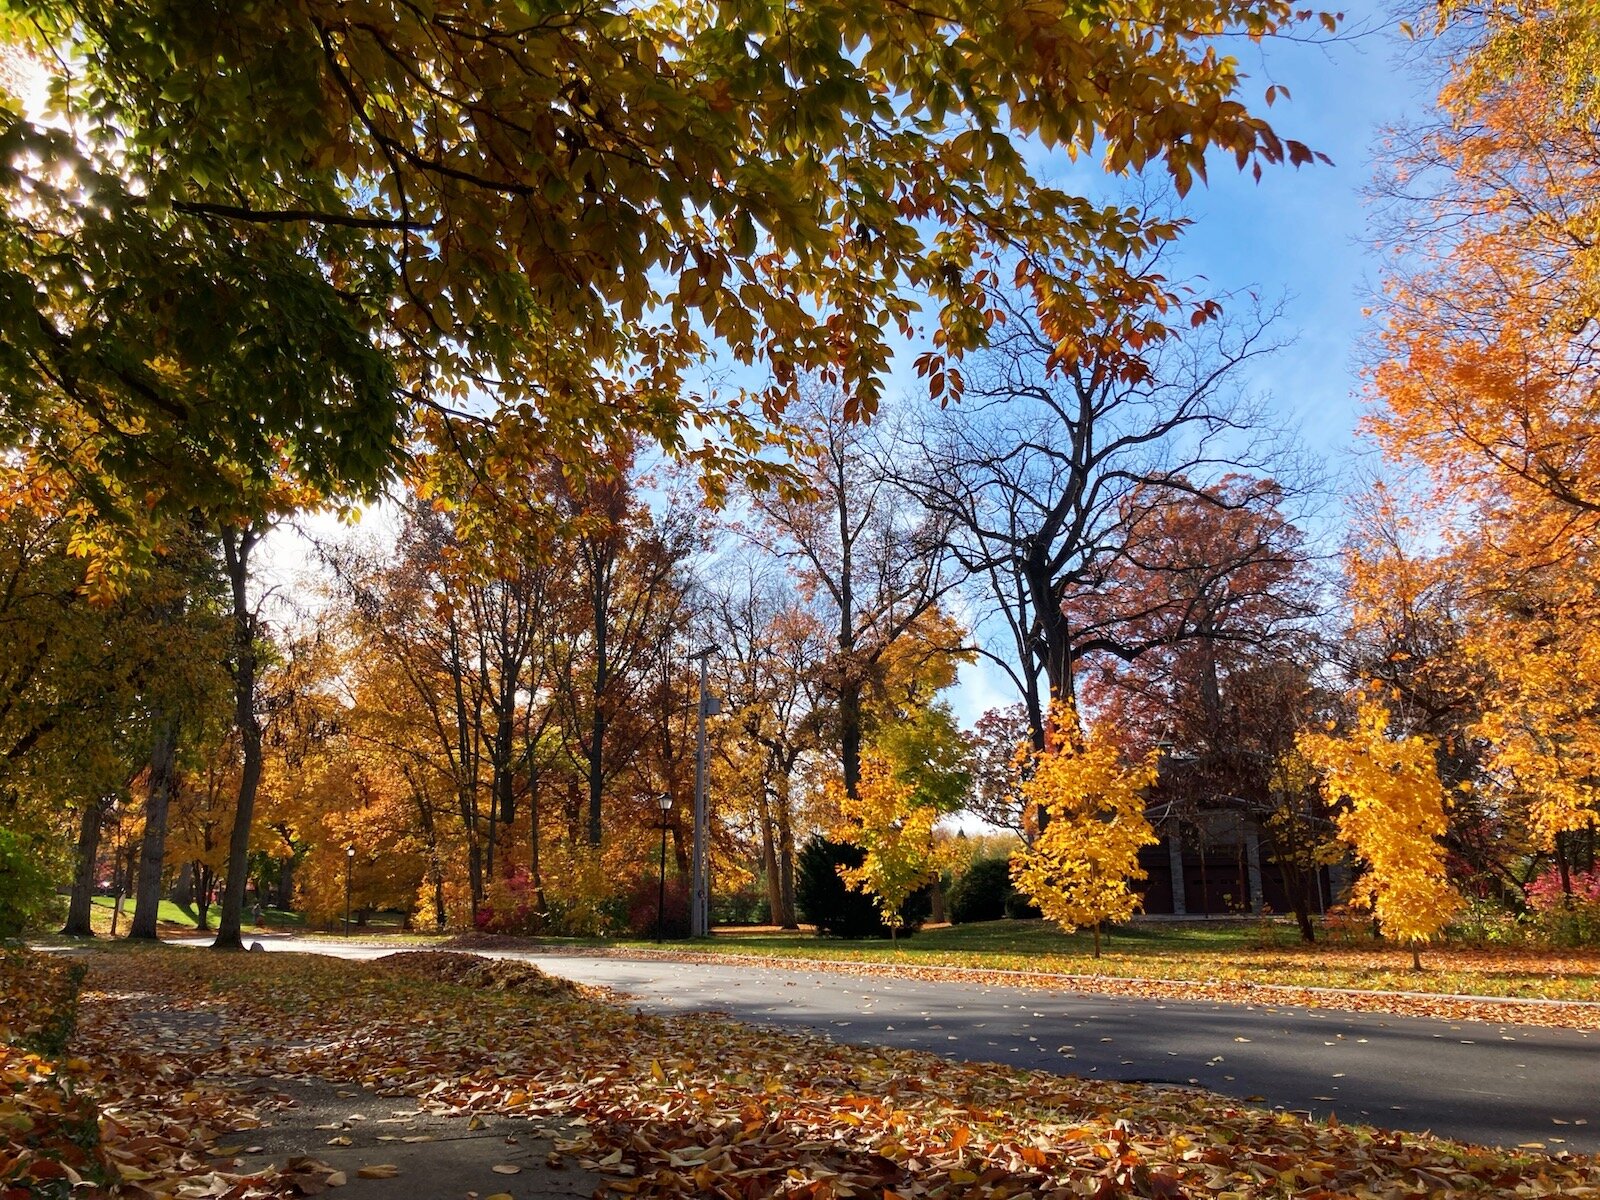 Native trees create a colorful canopy of reds, oranges, yellows, and purples in Historic Southwood Park each fall.